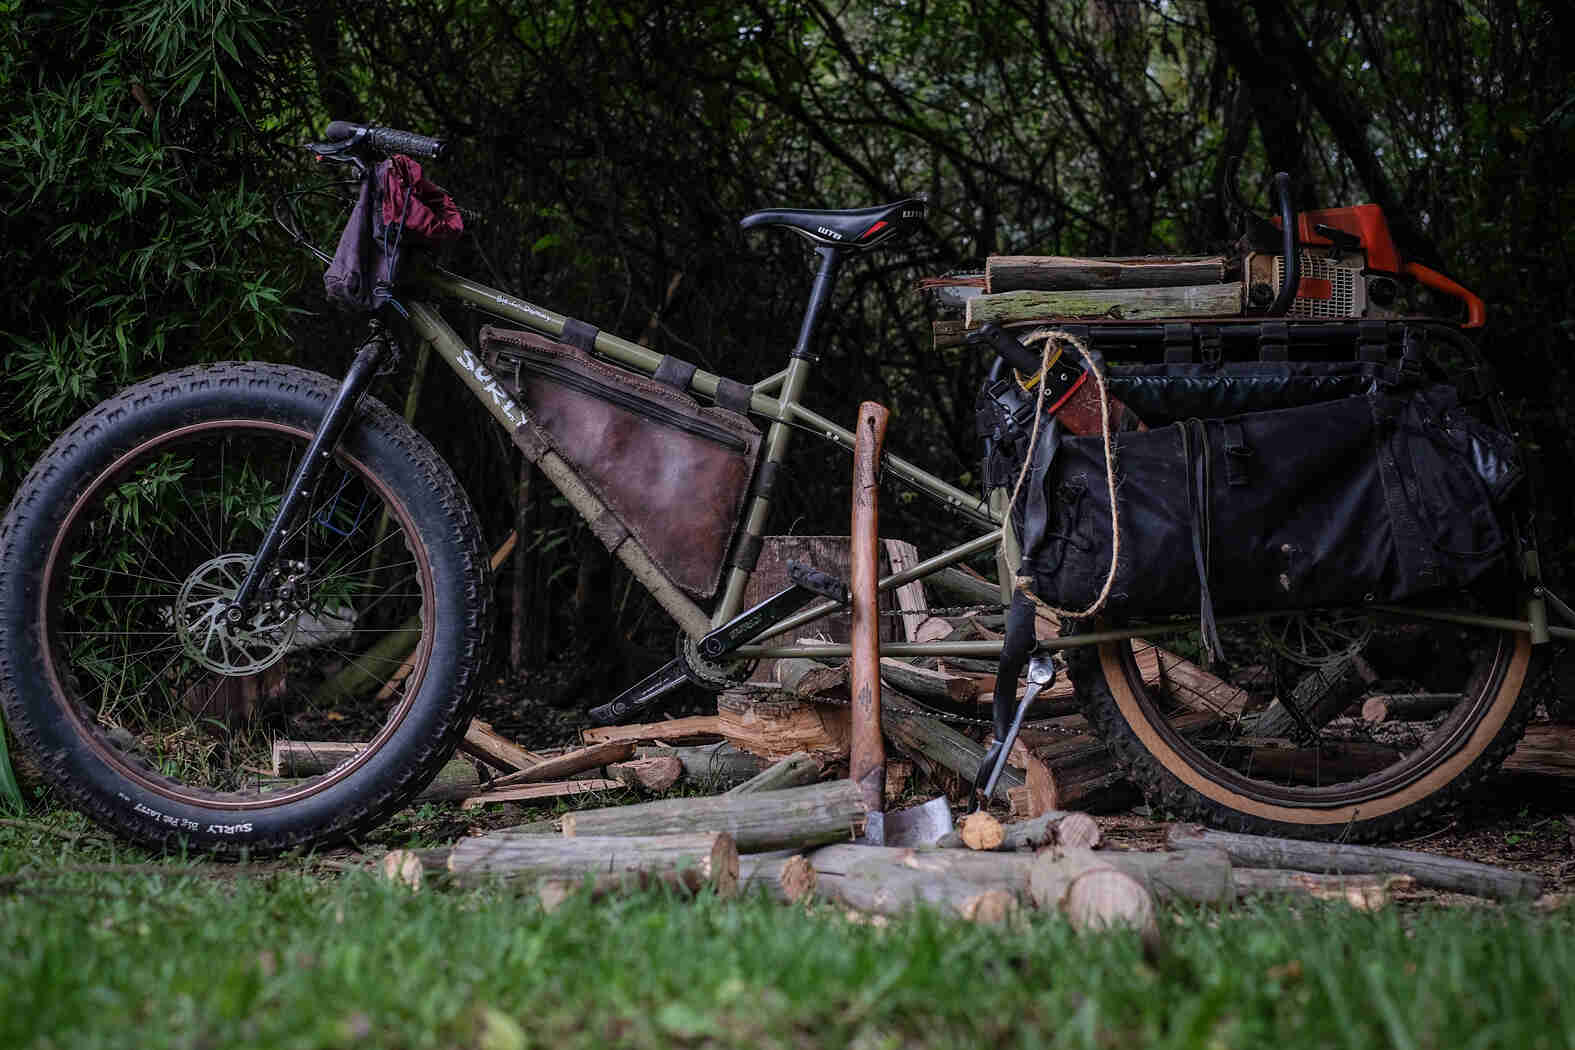 Left view of a Surly Big Fat Dummy bike, on top of axe chopped logs, with thick woods in the background